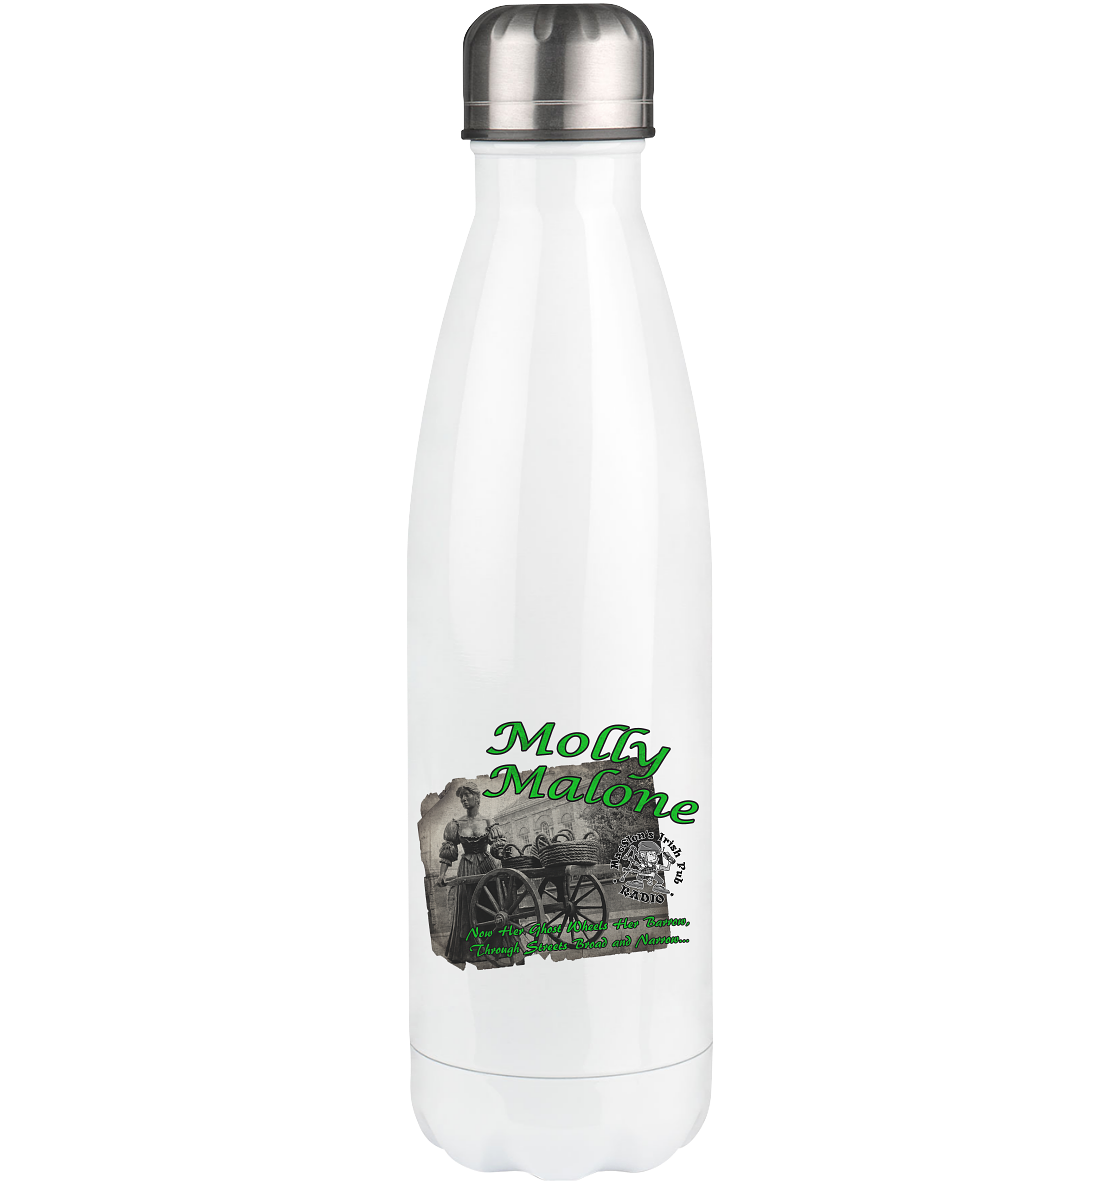 "Molly Malone" - Thermoflasche 500ml